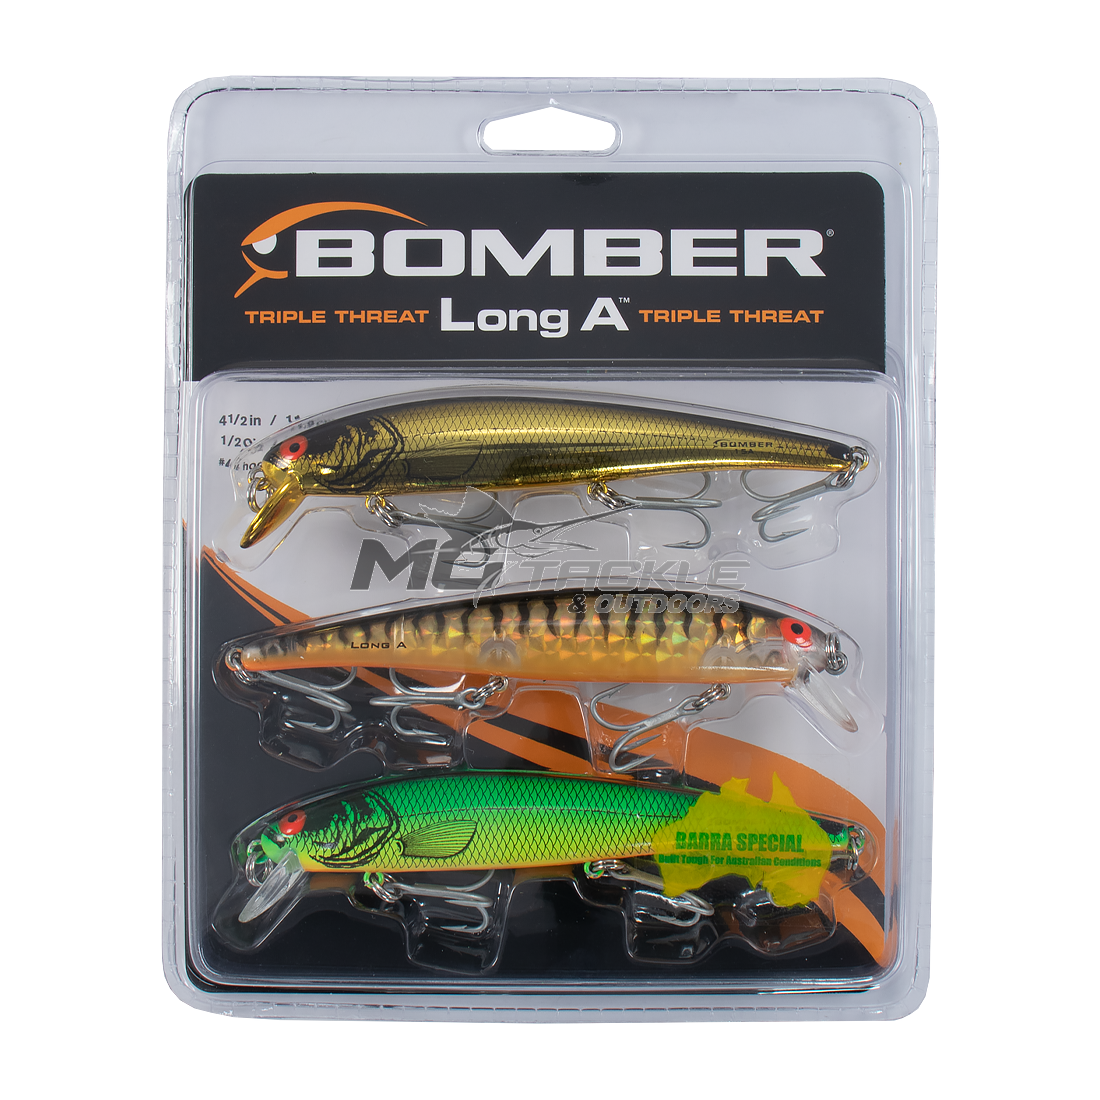 Bomber Triple Threat Long A Lure Pack